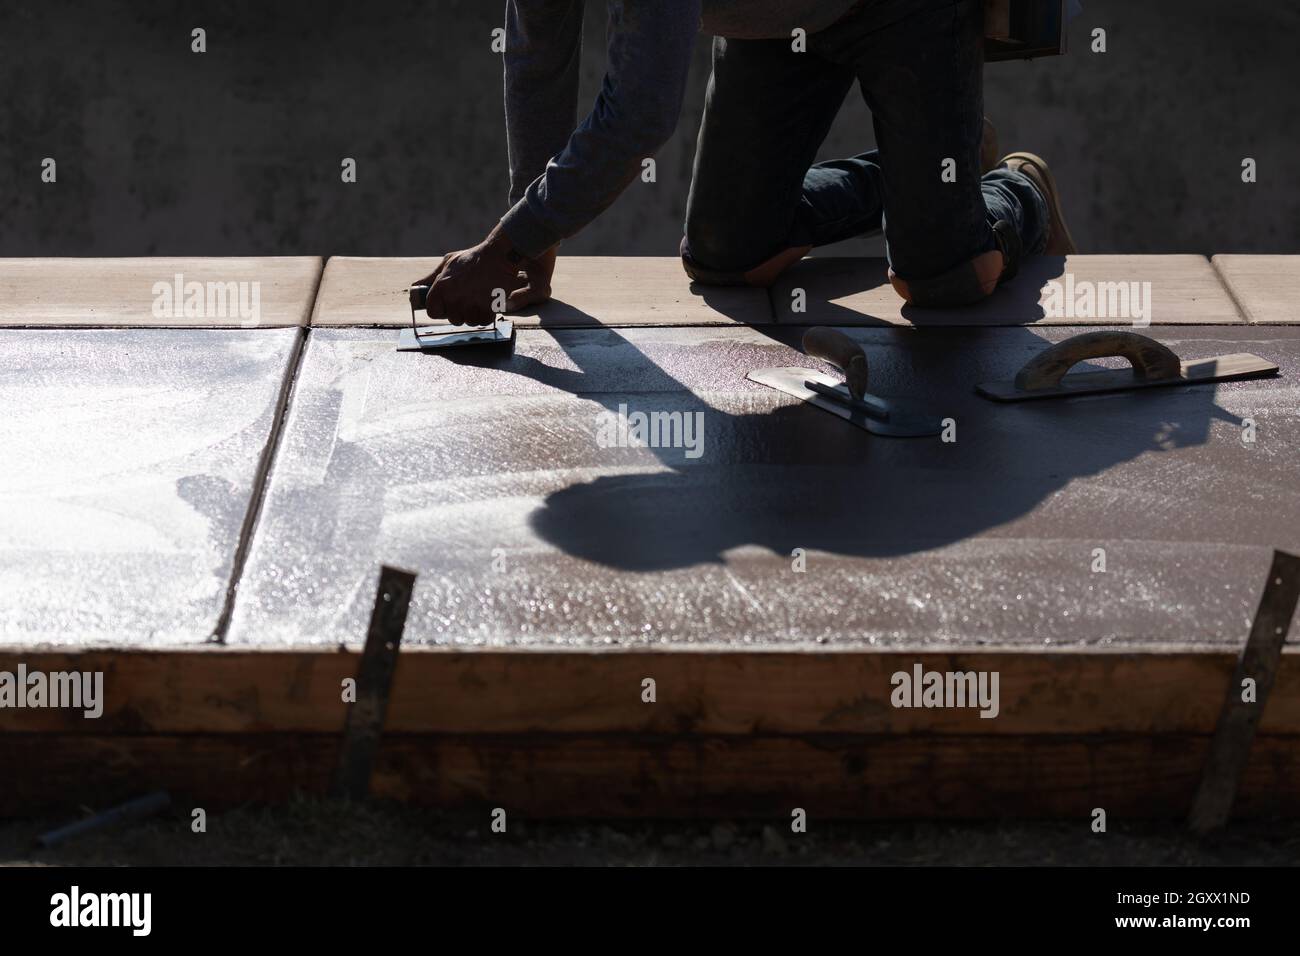 Construction Worker Smoothing Wet Cement With Hand Edger Tool Stock Photo